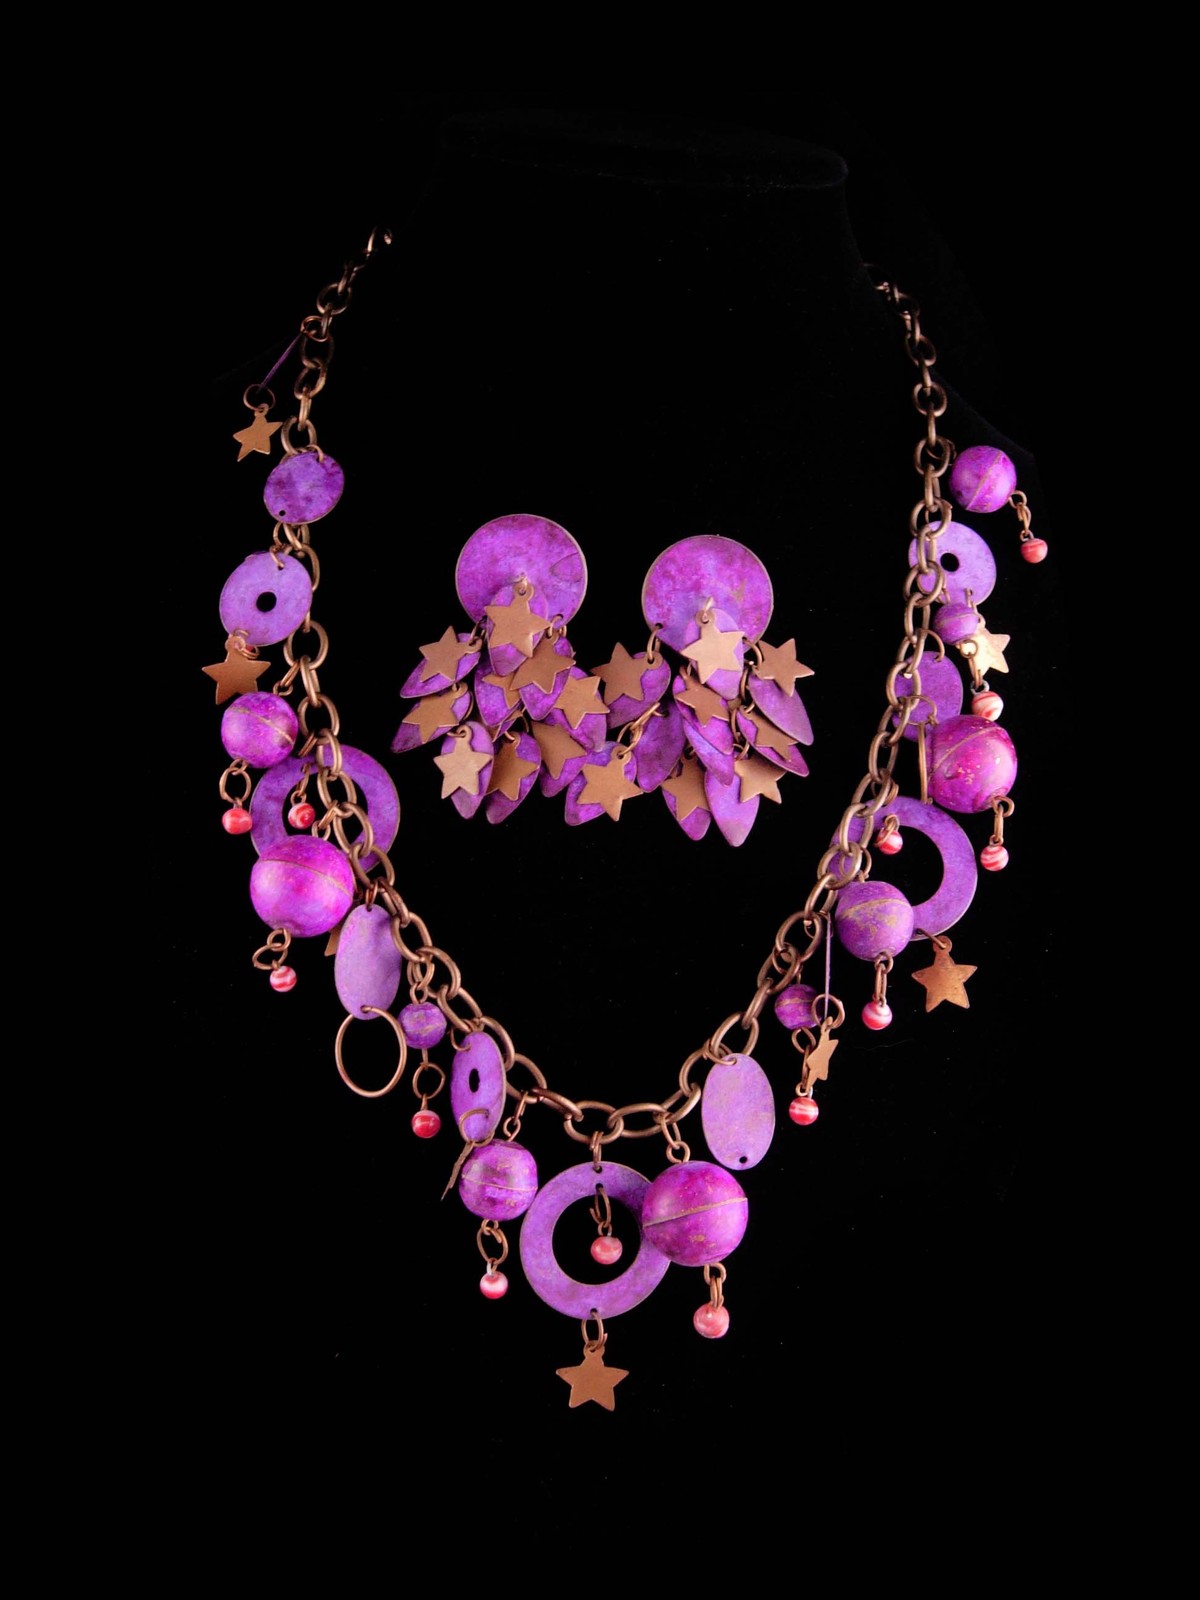 Primary image for Vintage Hippie moon stars necklace and earrings - purple distressed metal - dang